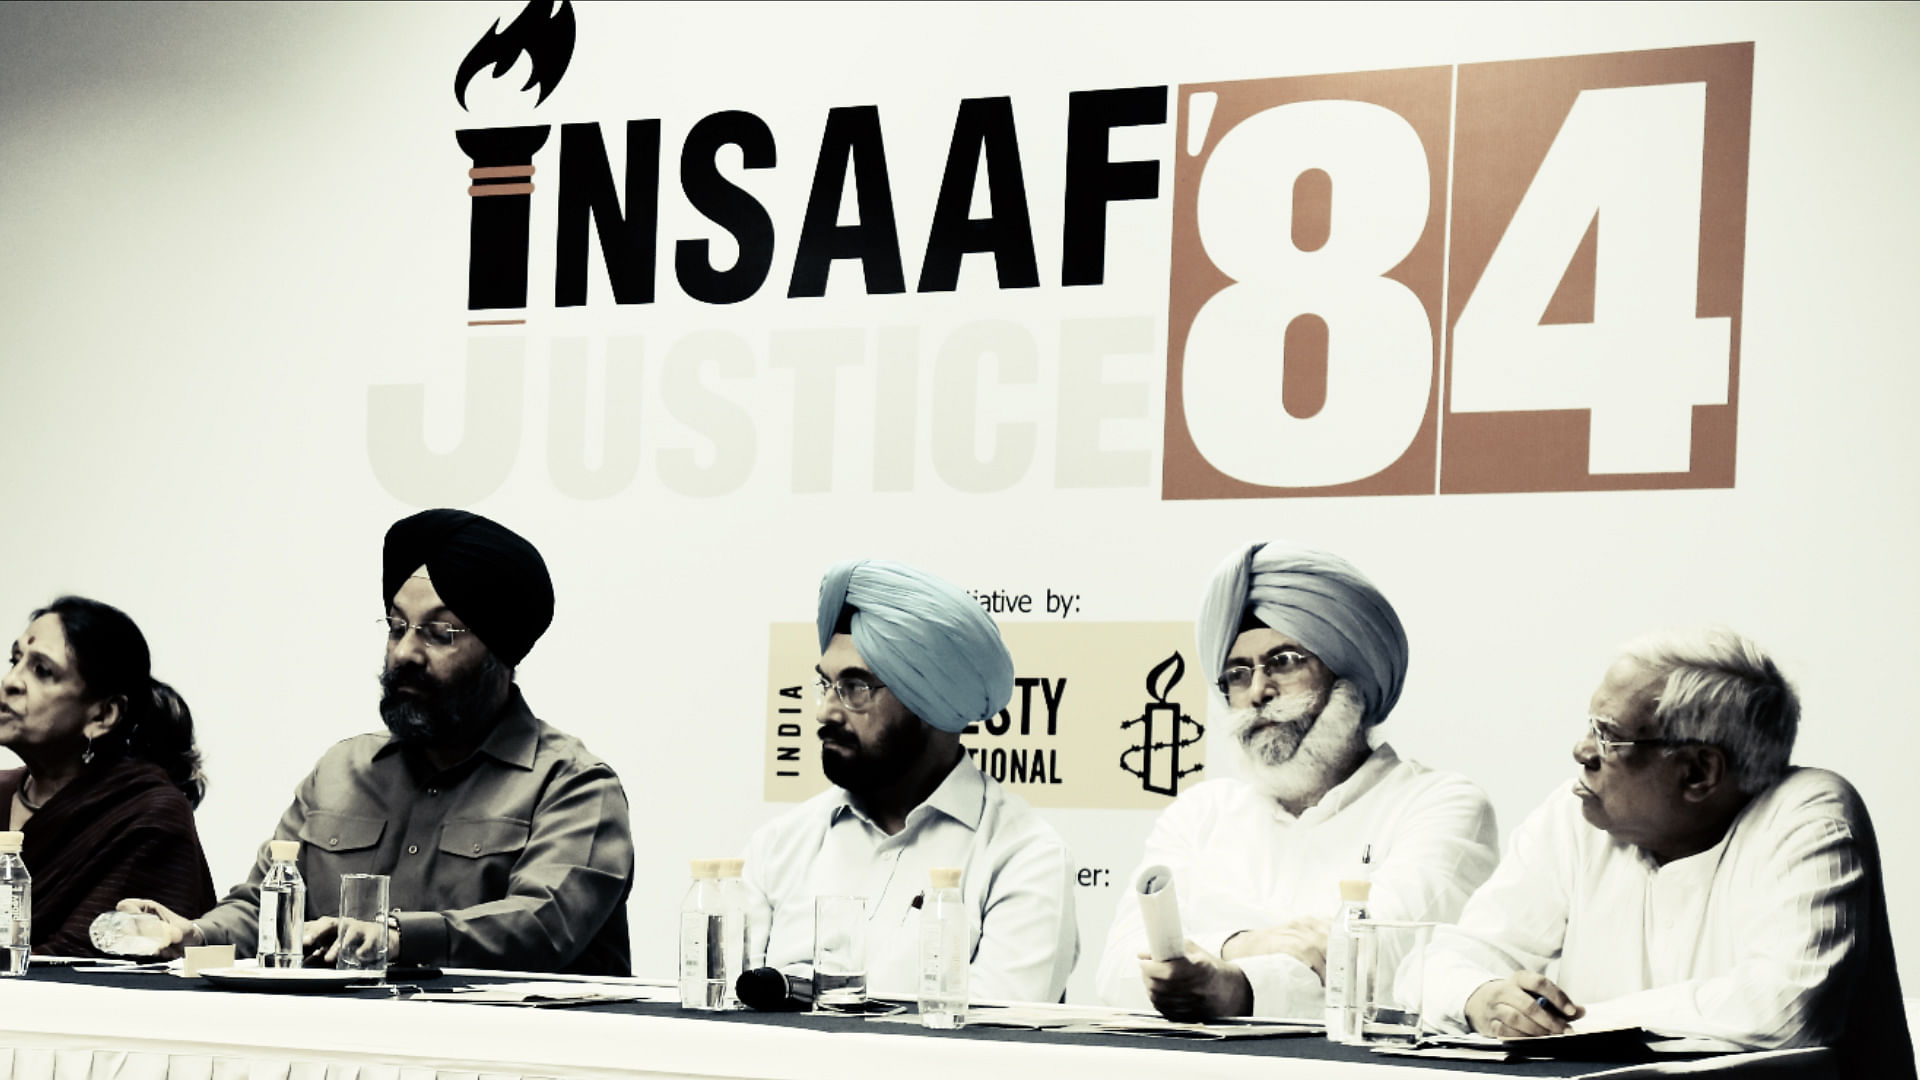 Amnesty India launches Insaaf 84 after 32 years (Photo: Altered by The Quint)